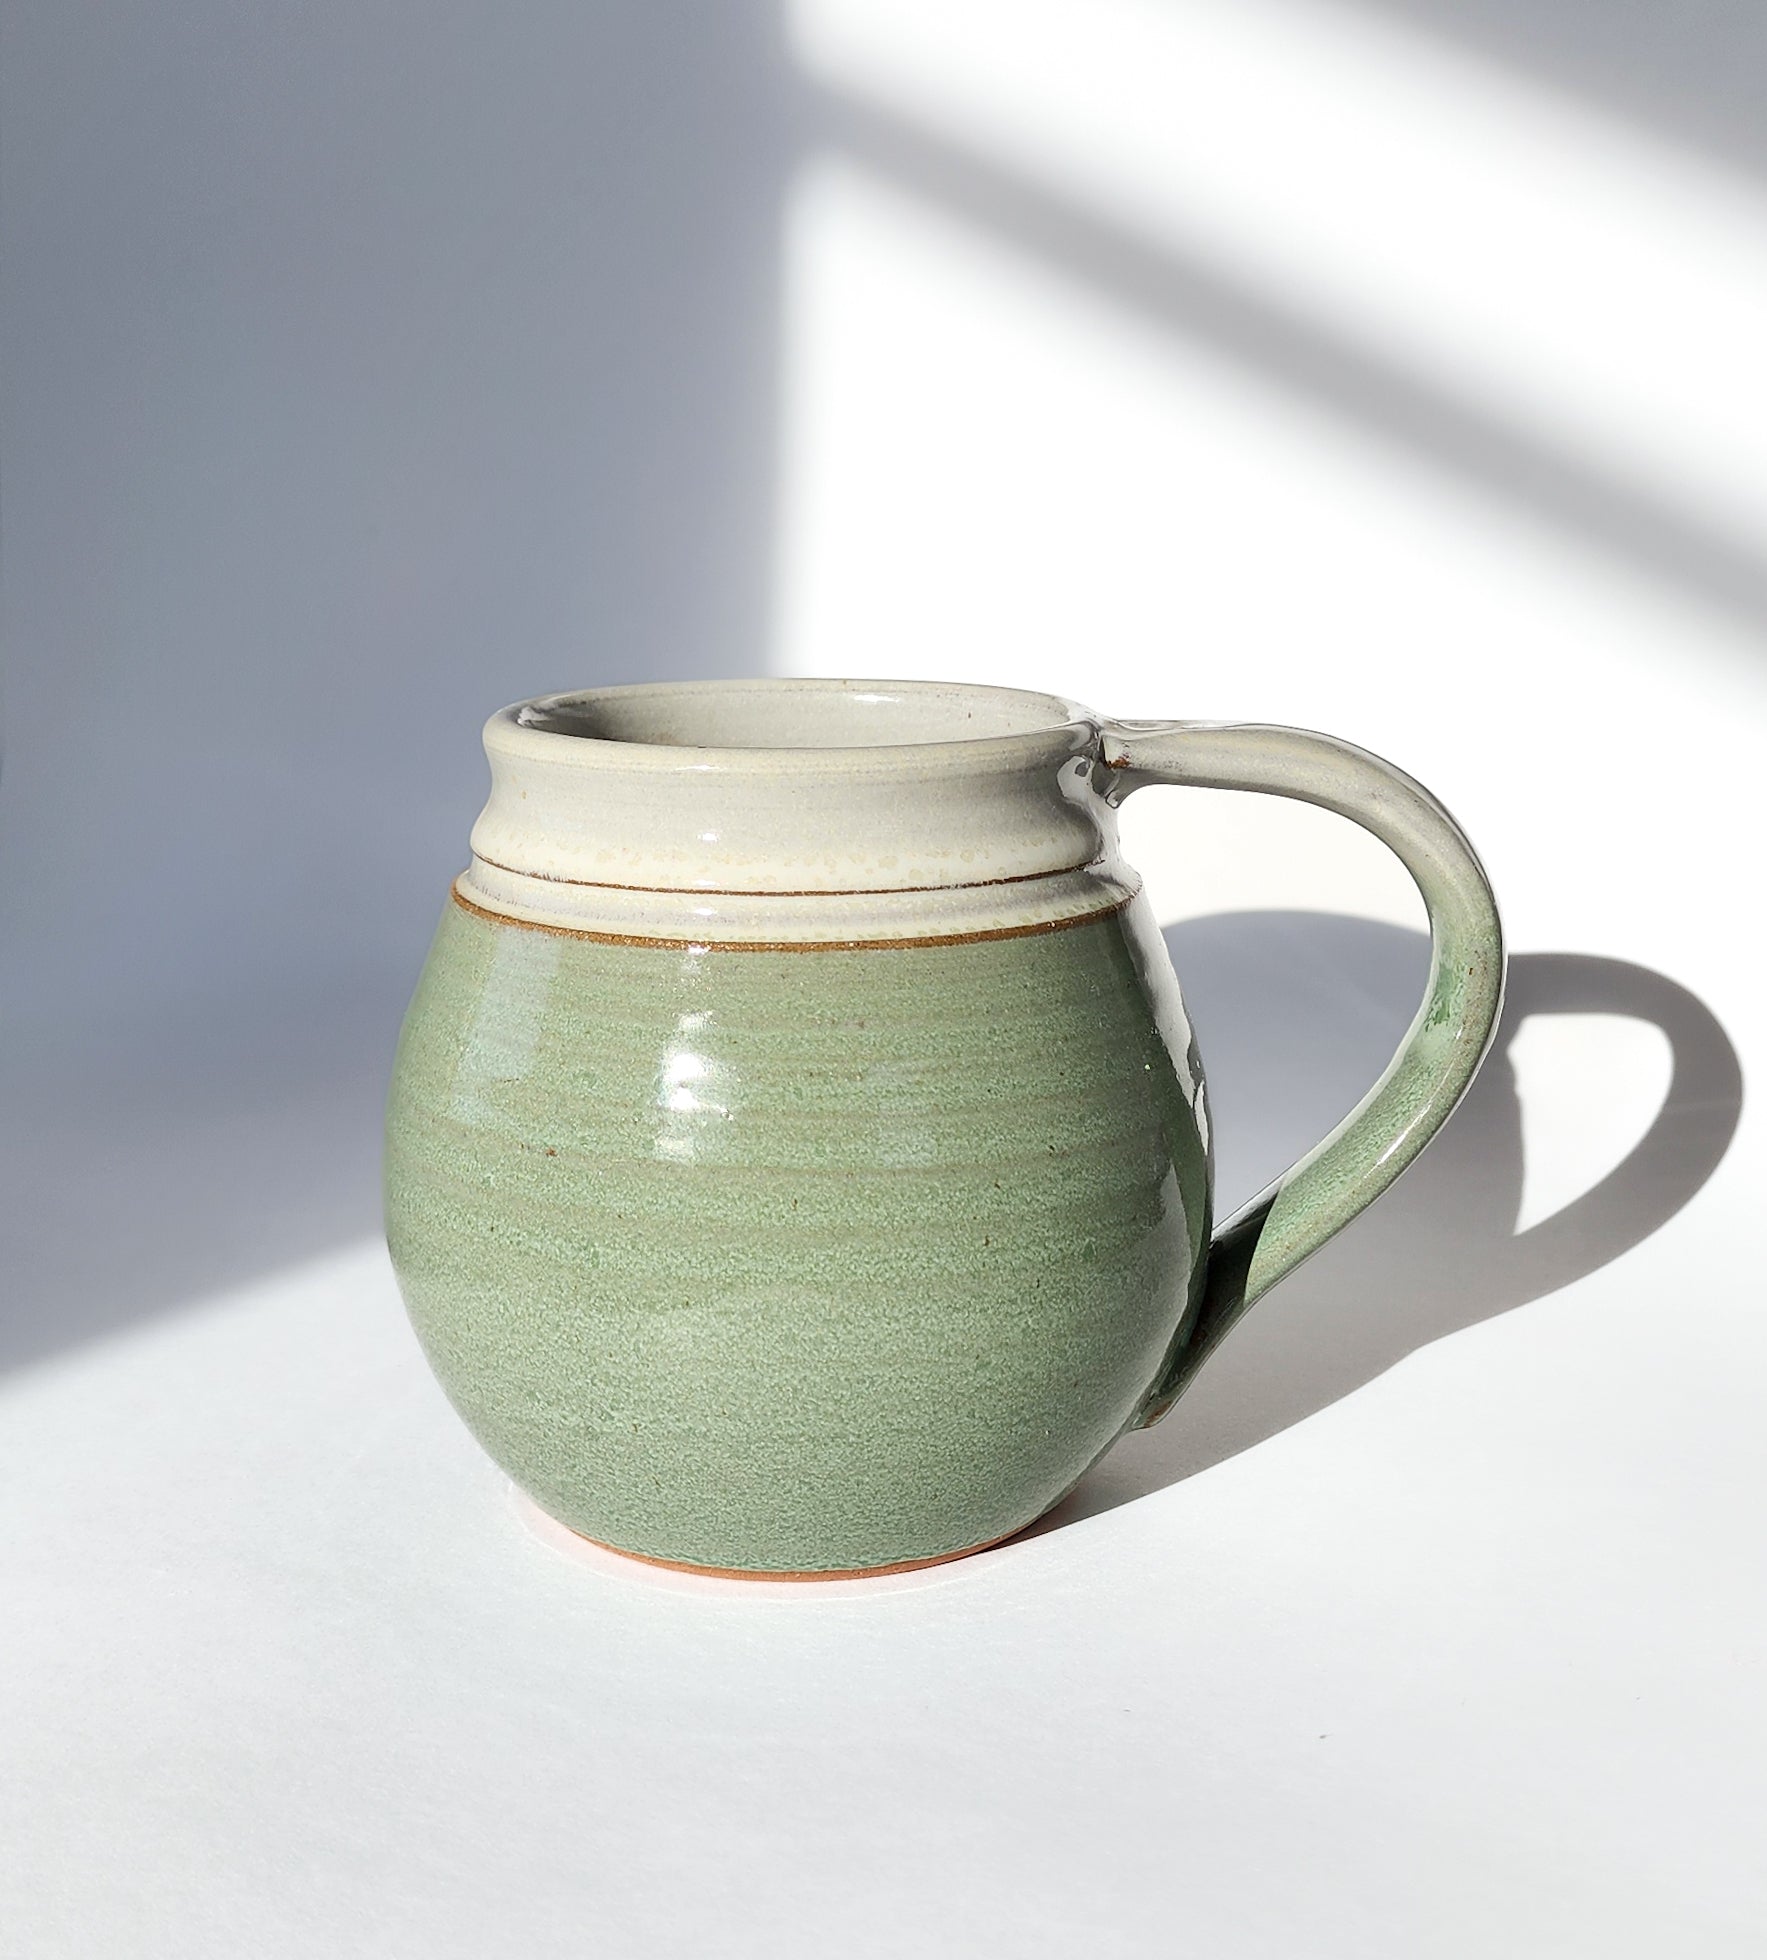 Image: Clinton Pottery's 30 oz Jumbo Mug in Light Green – A fresh and generously sized addition to your kitchen, this machine washable mug seamlessly blends artistry with functionality. The invigorating Light Green color adds a touch of nature's vitality, reminiscent of spring foliage and sunlit meadows. Perfect for enjoying ample servings of your favorite coffee or tea with a breath of natural elegance.